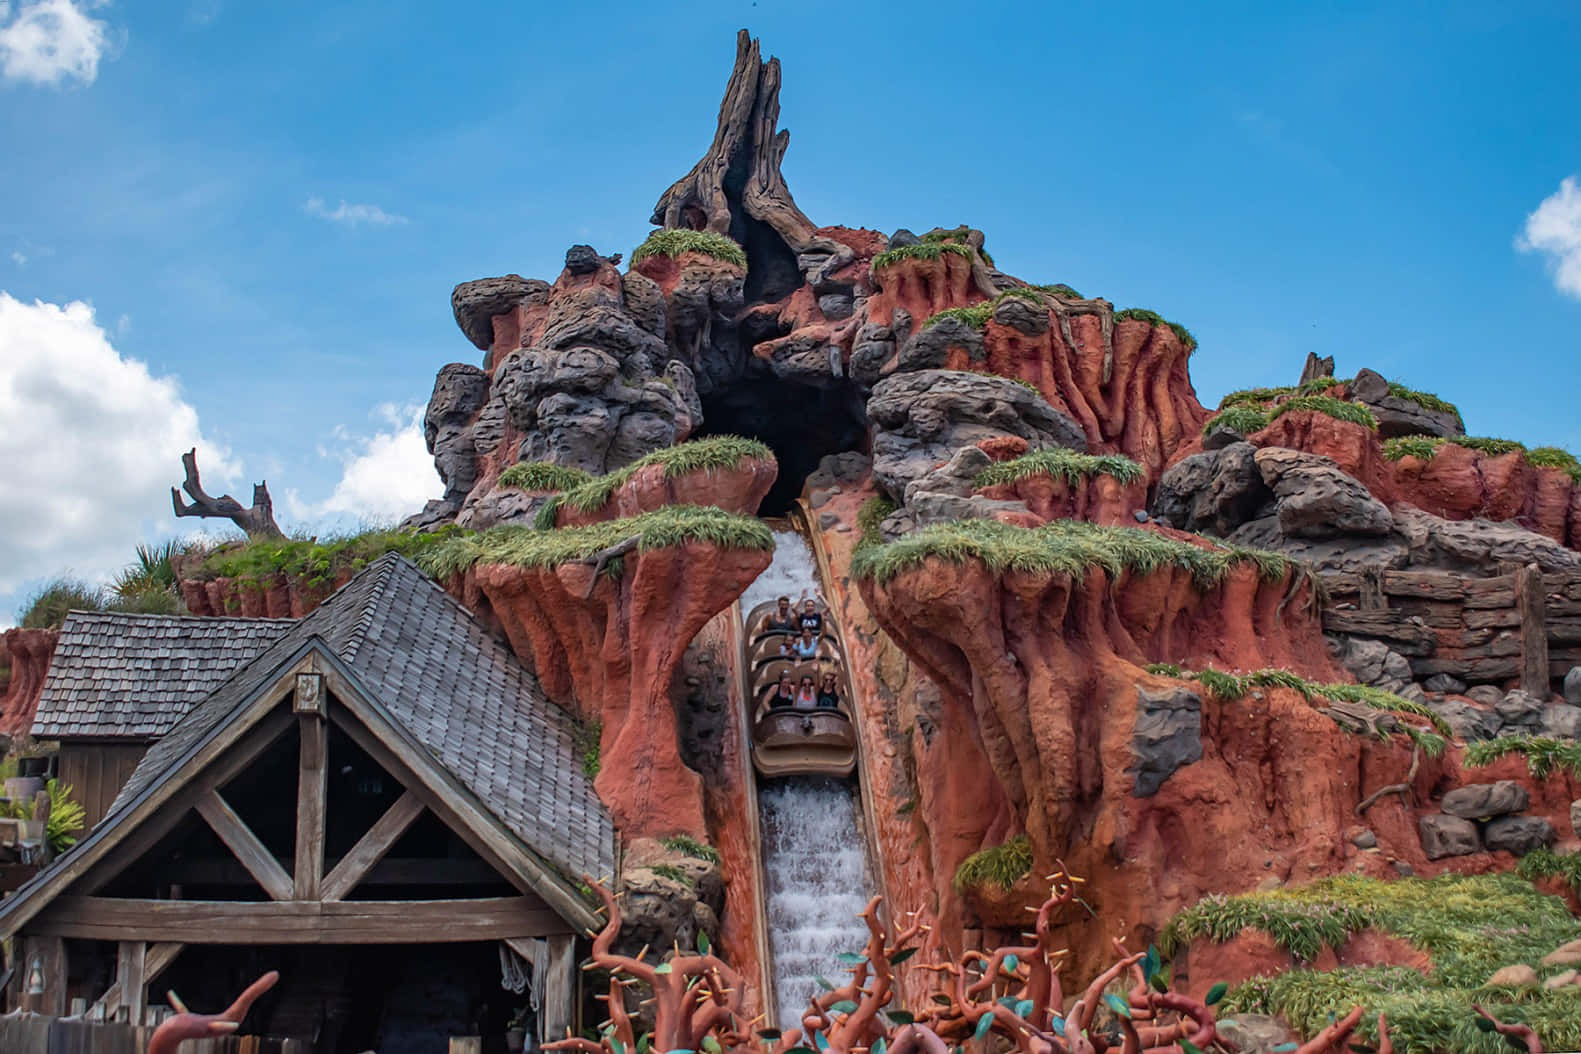 Enjoy a magical journey full of pirates, animals, and plenty of thrilling drops, on Disney's iconic Splash Mountain.